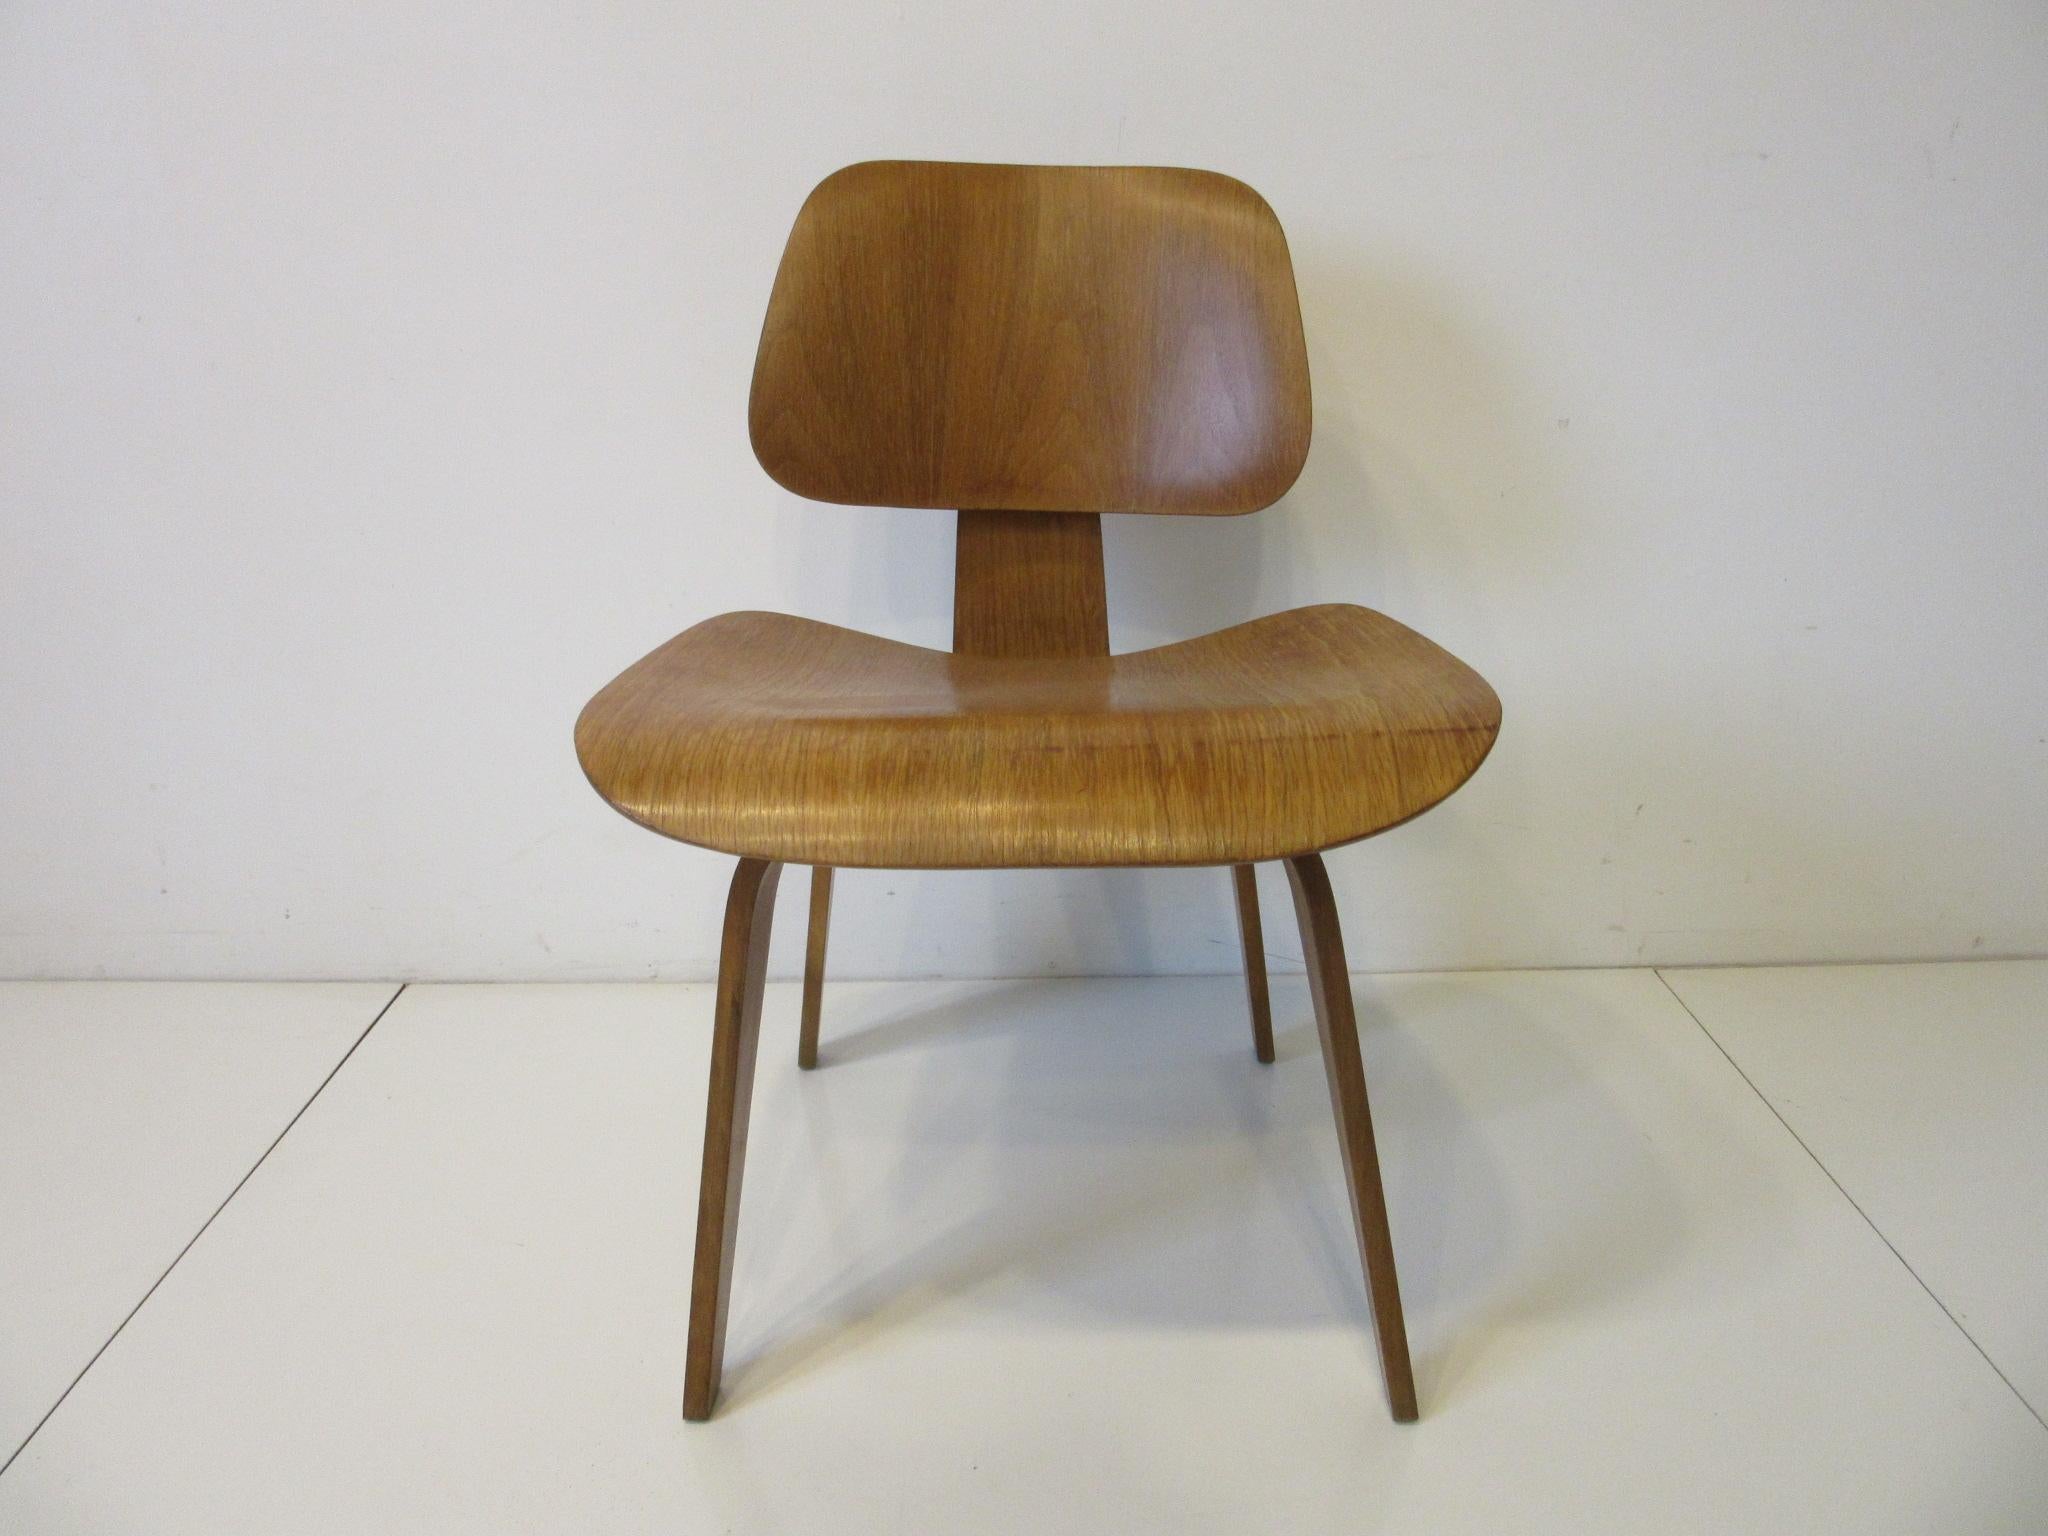 A DCW dining or desk chair wood, this earlier production molded plywood chair designed by Charles and Ray Eames is the classic standard of midcentury furniture. A sculptural timeless design far ahead of the rest and still fresh today manufactured by